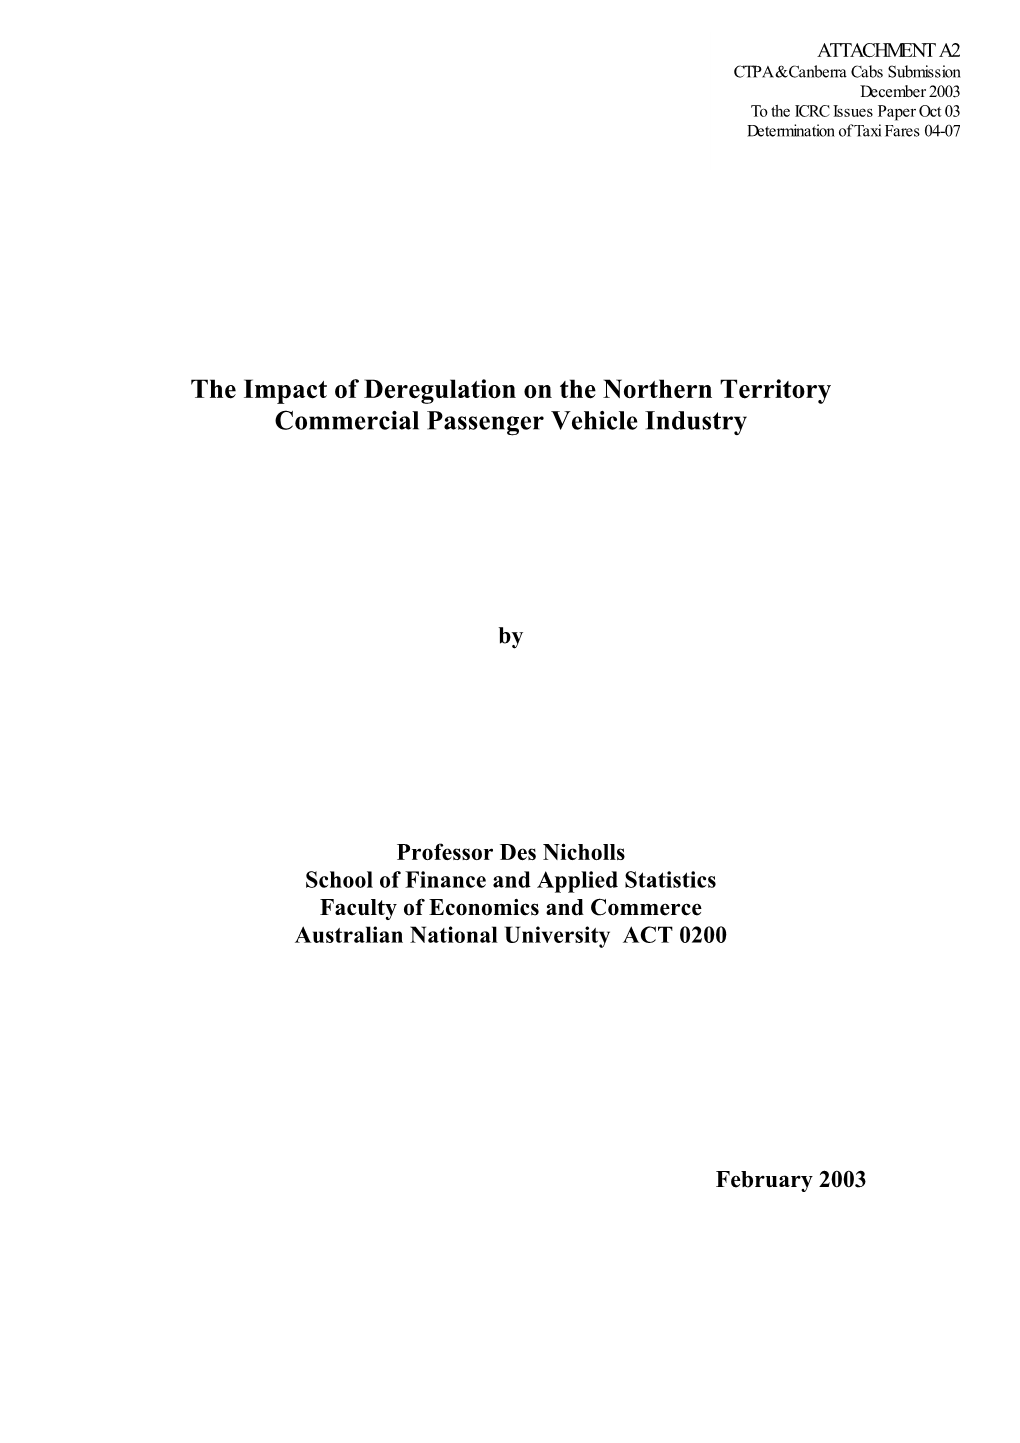 The Impact of Deregulation on the Northern Territory Commercial Passenger Vehicle Industry